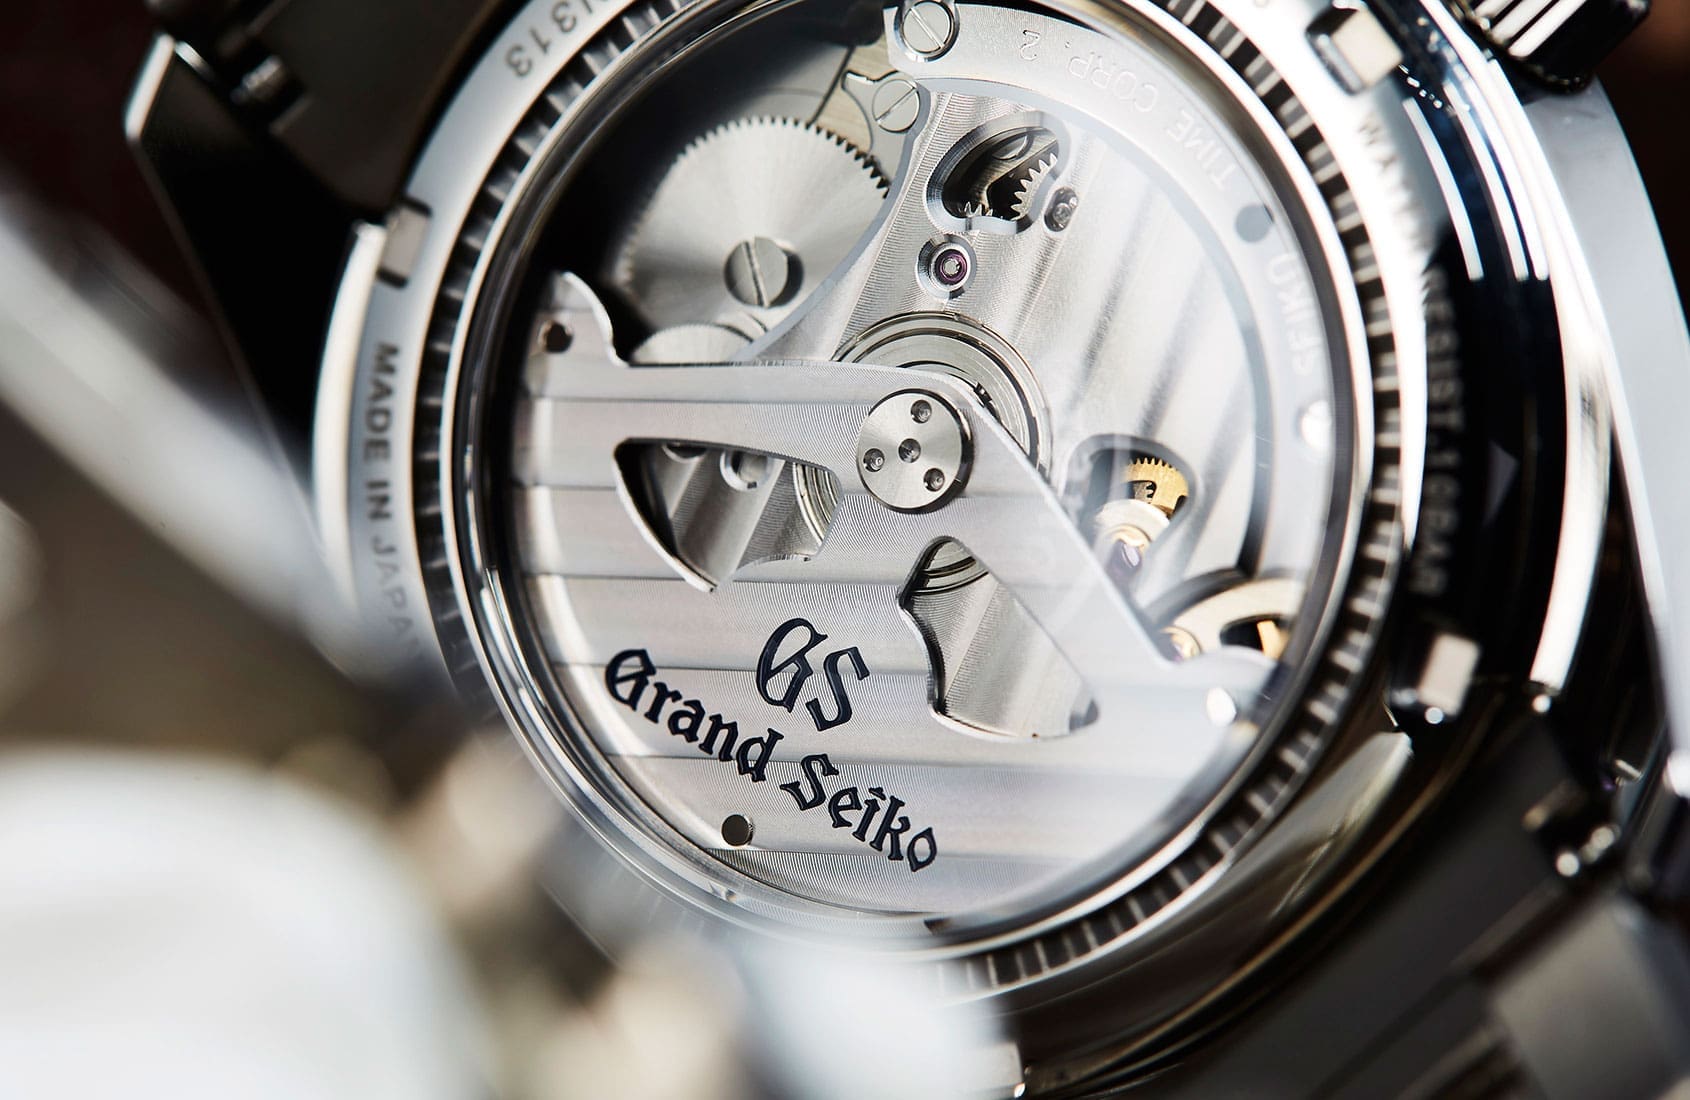 VIDEO: Grand Seiko’s Spring Drive technology explained … in 2 minutes